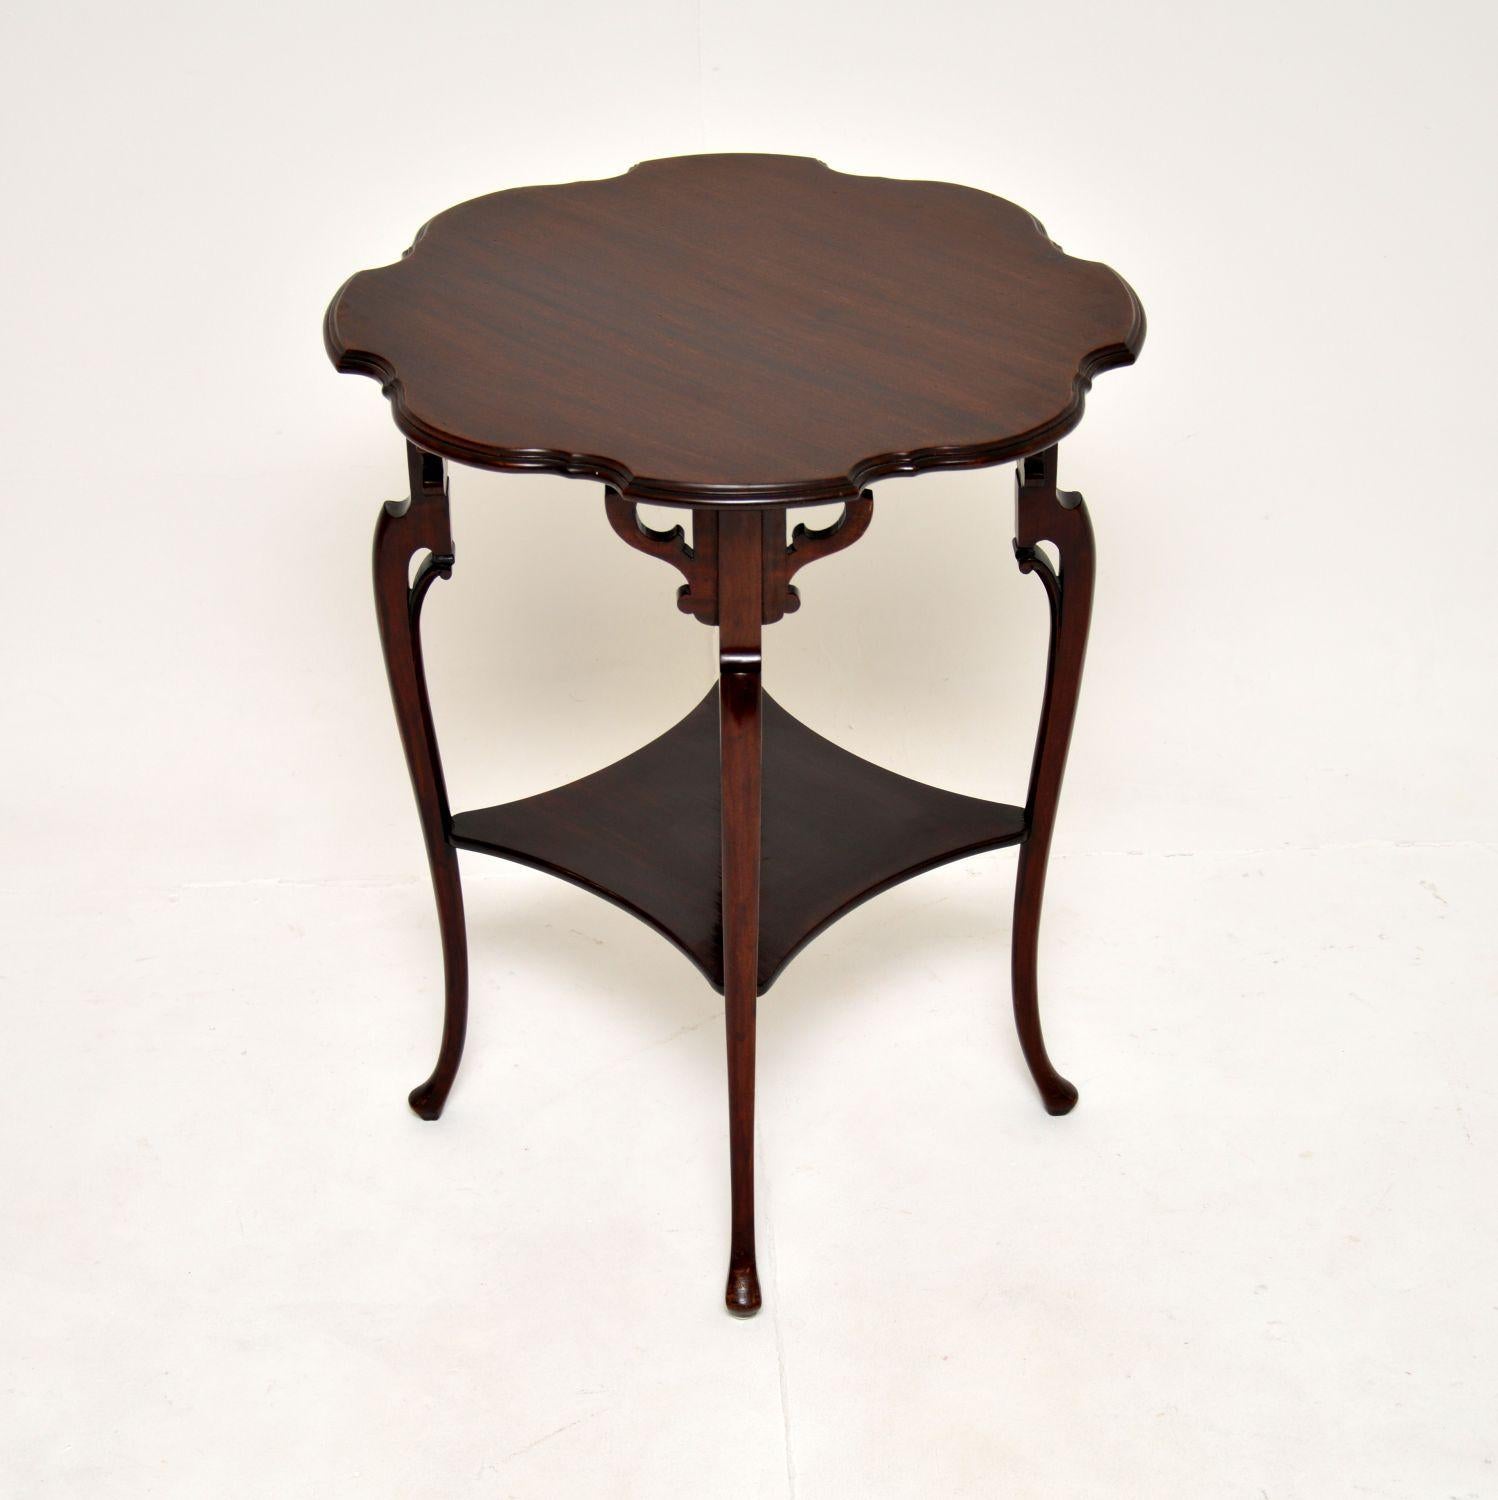 British Antique Edwardian Occasional Side Table For Sale